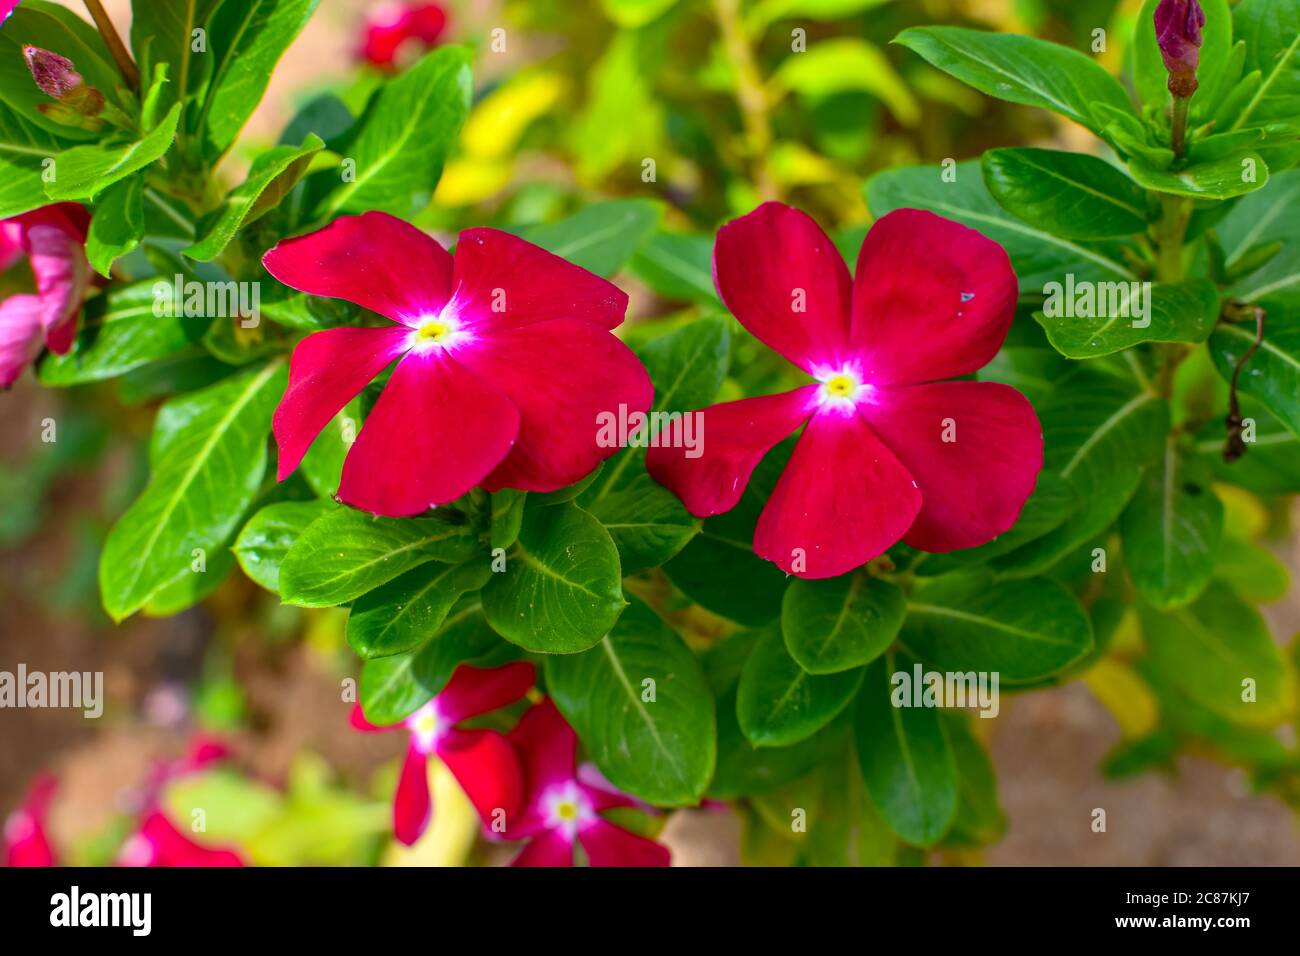 Red Tecoma Flowers With Green Leaves & Branches On Tree. Stock Photo